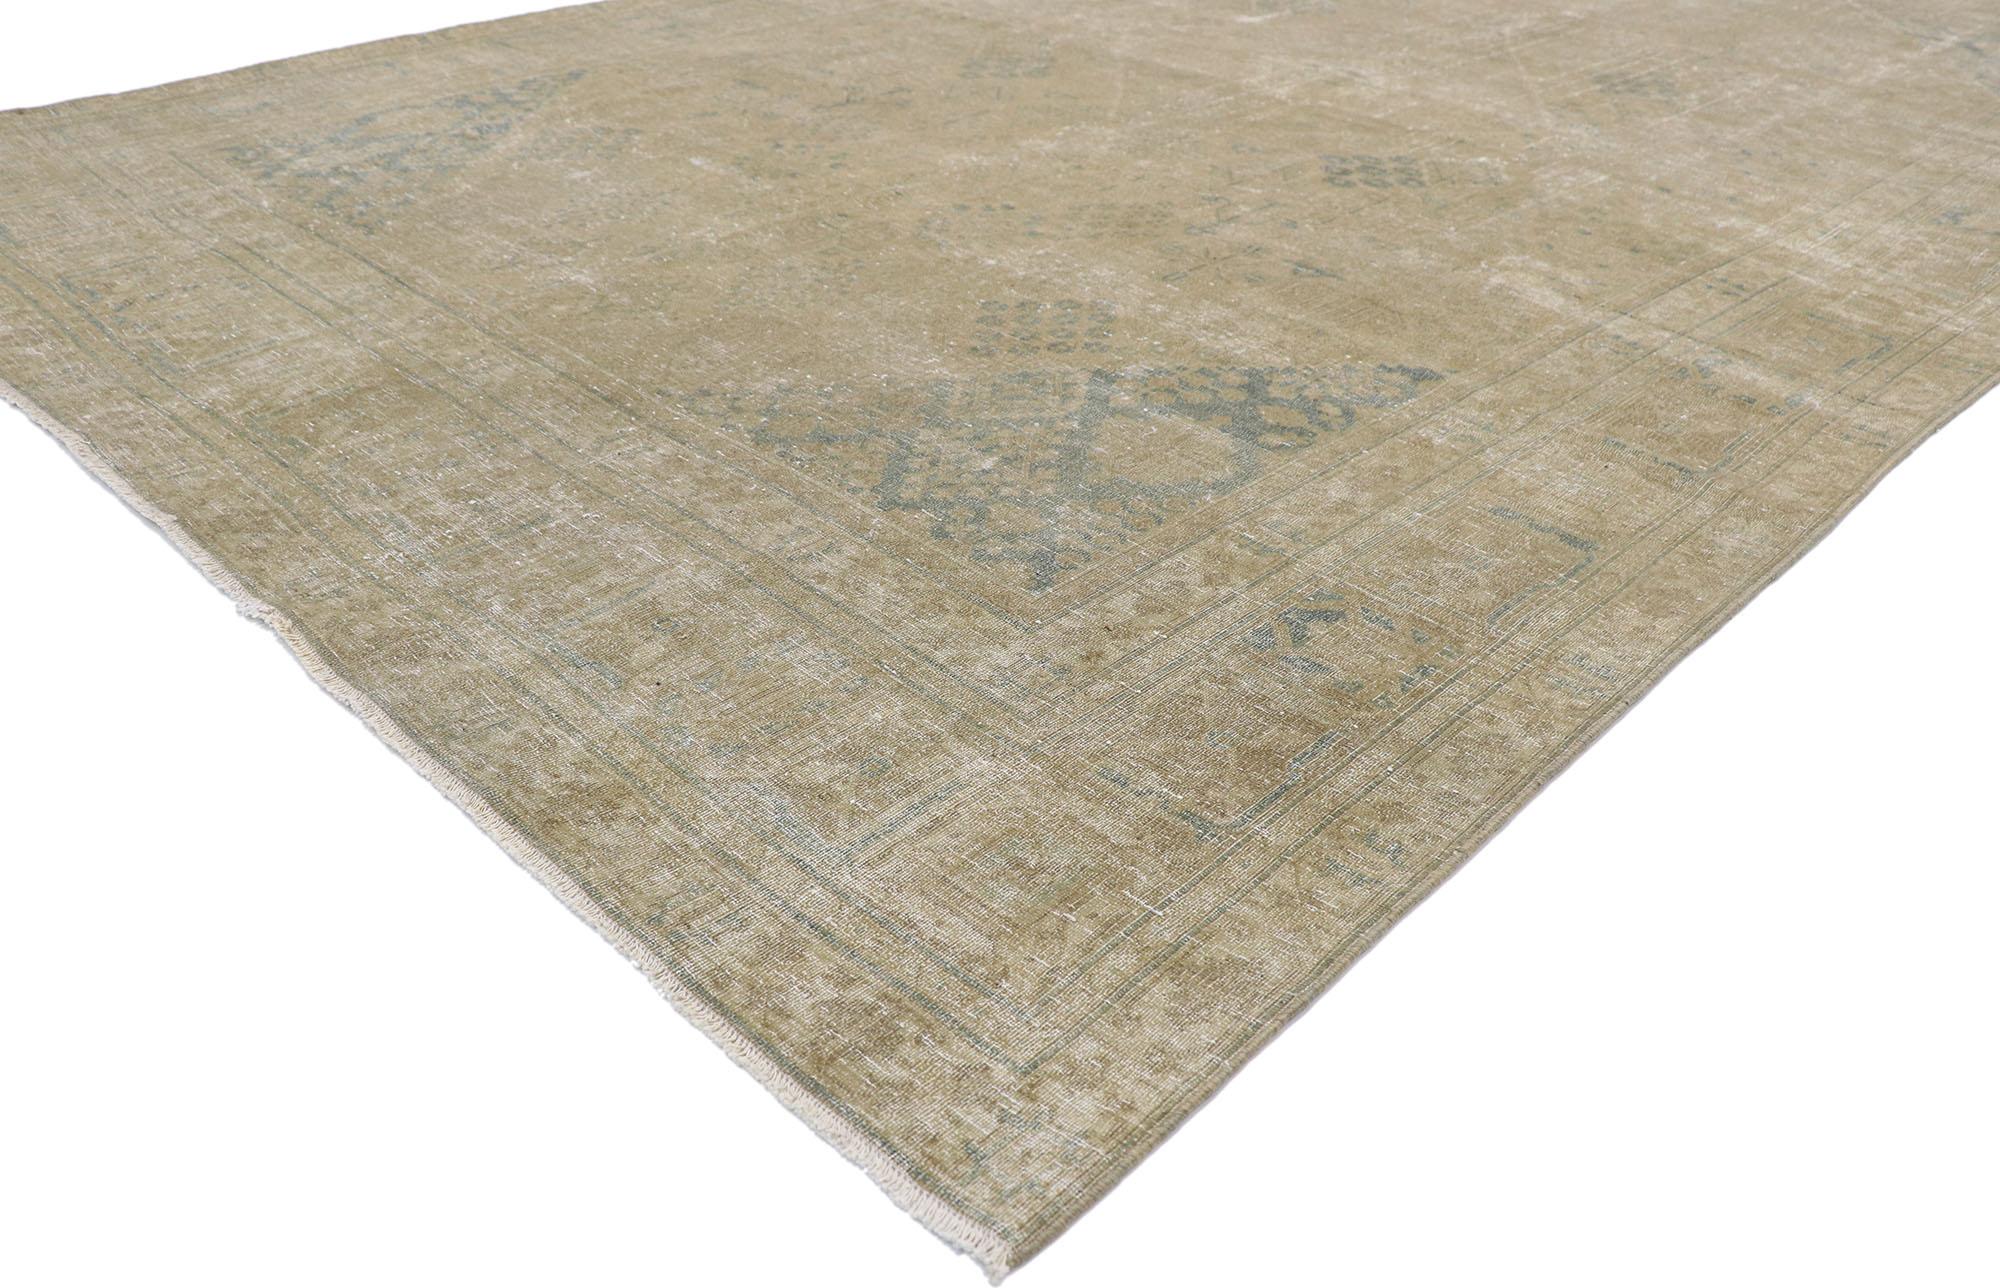 60854 Distressed Antique Persian Tabriz rug with Rustic Plantation style. Emanating sophistication and grace with light neutral colors, this hand knotted wool distressed antique Persian Tabriz rug beautifully embodies a rustic Plantation style. The